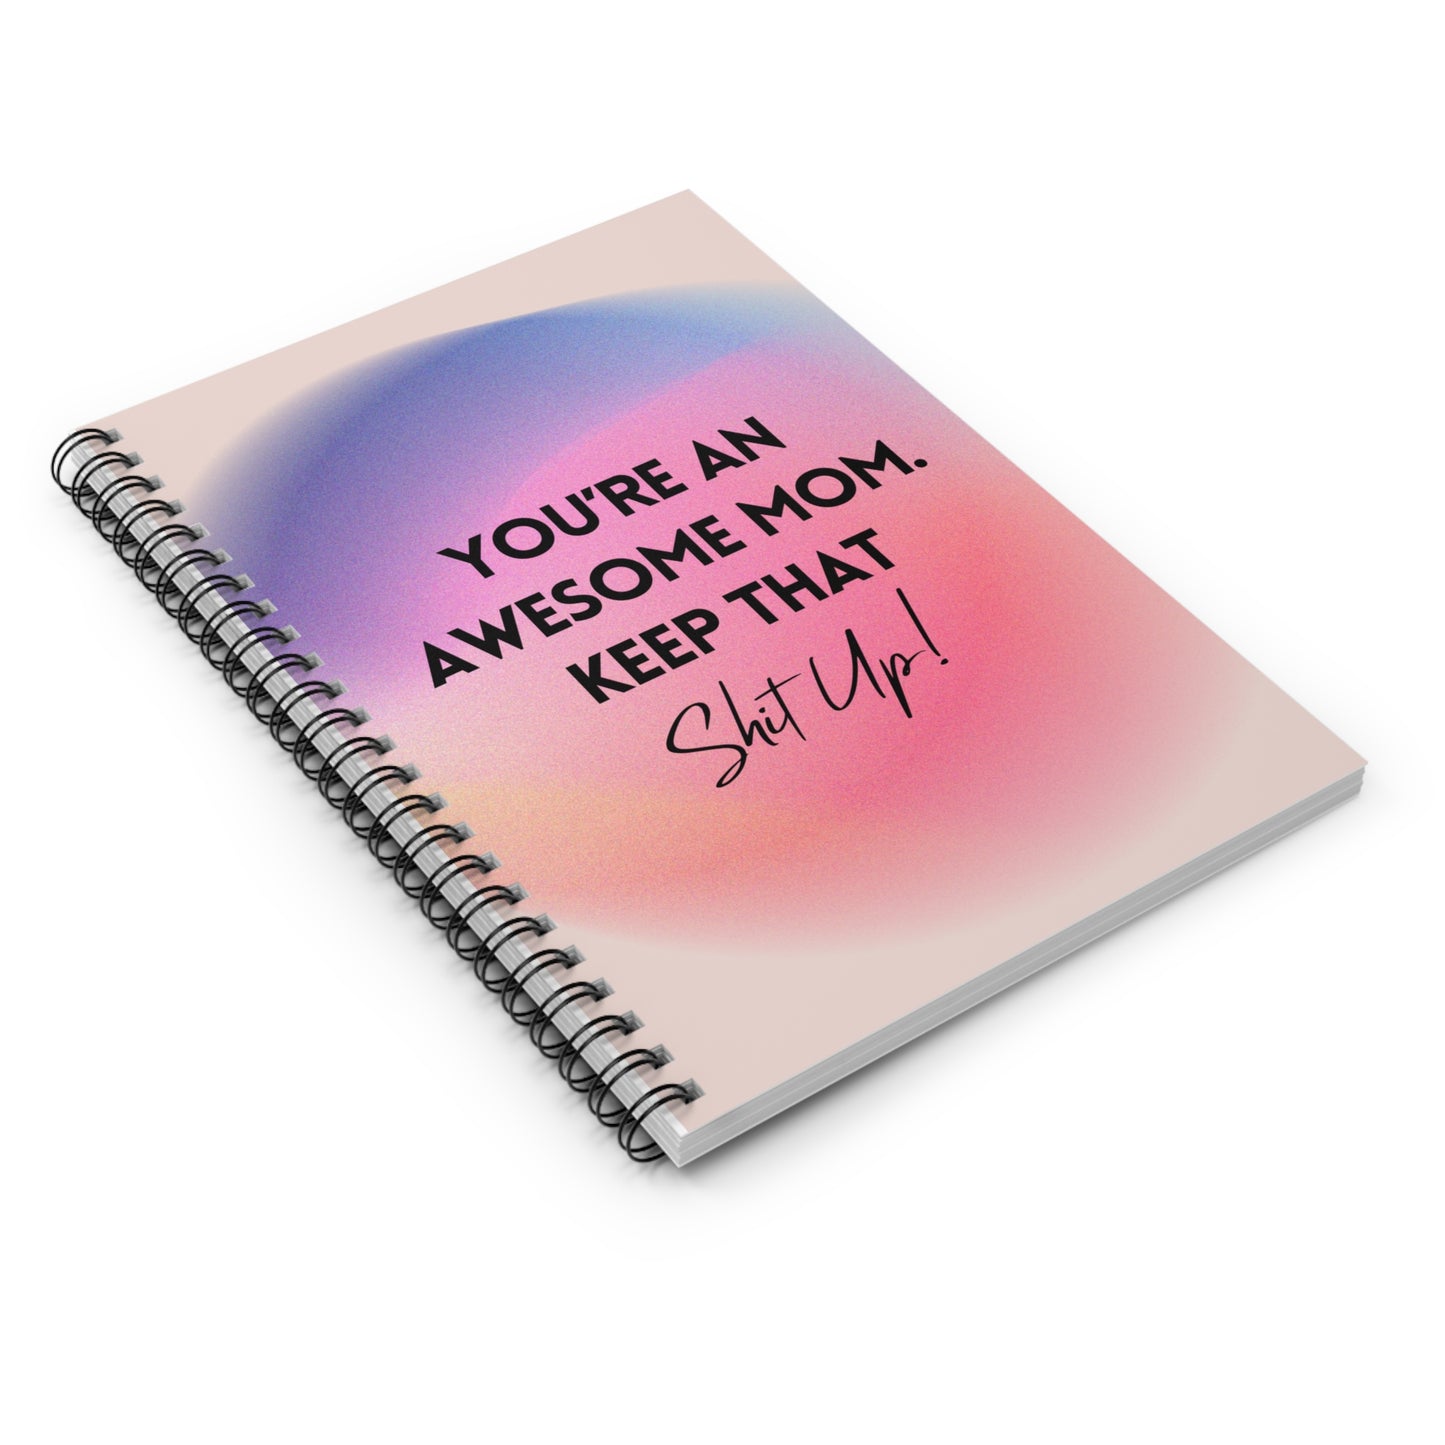 Gifts For Mom | Spiral Notebook